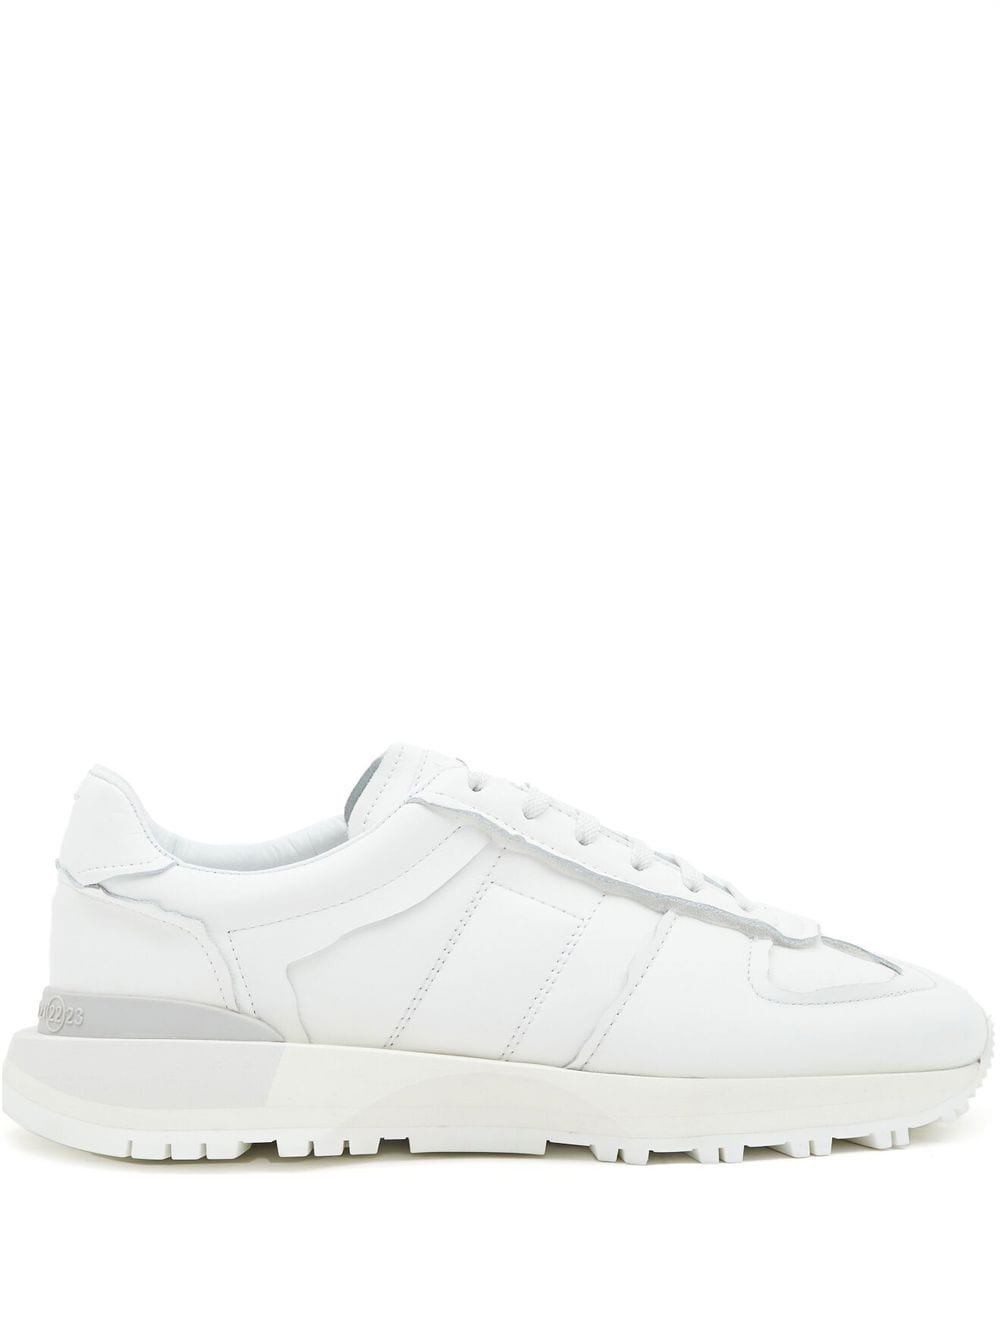 Image 1 of Maison Margiela 50-50 low-top sneakers